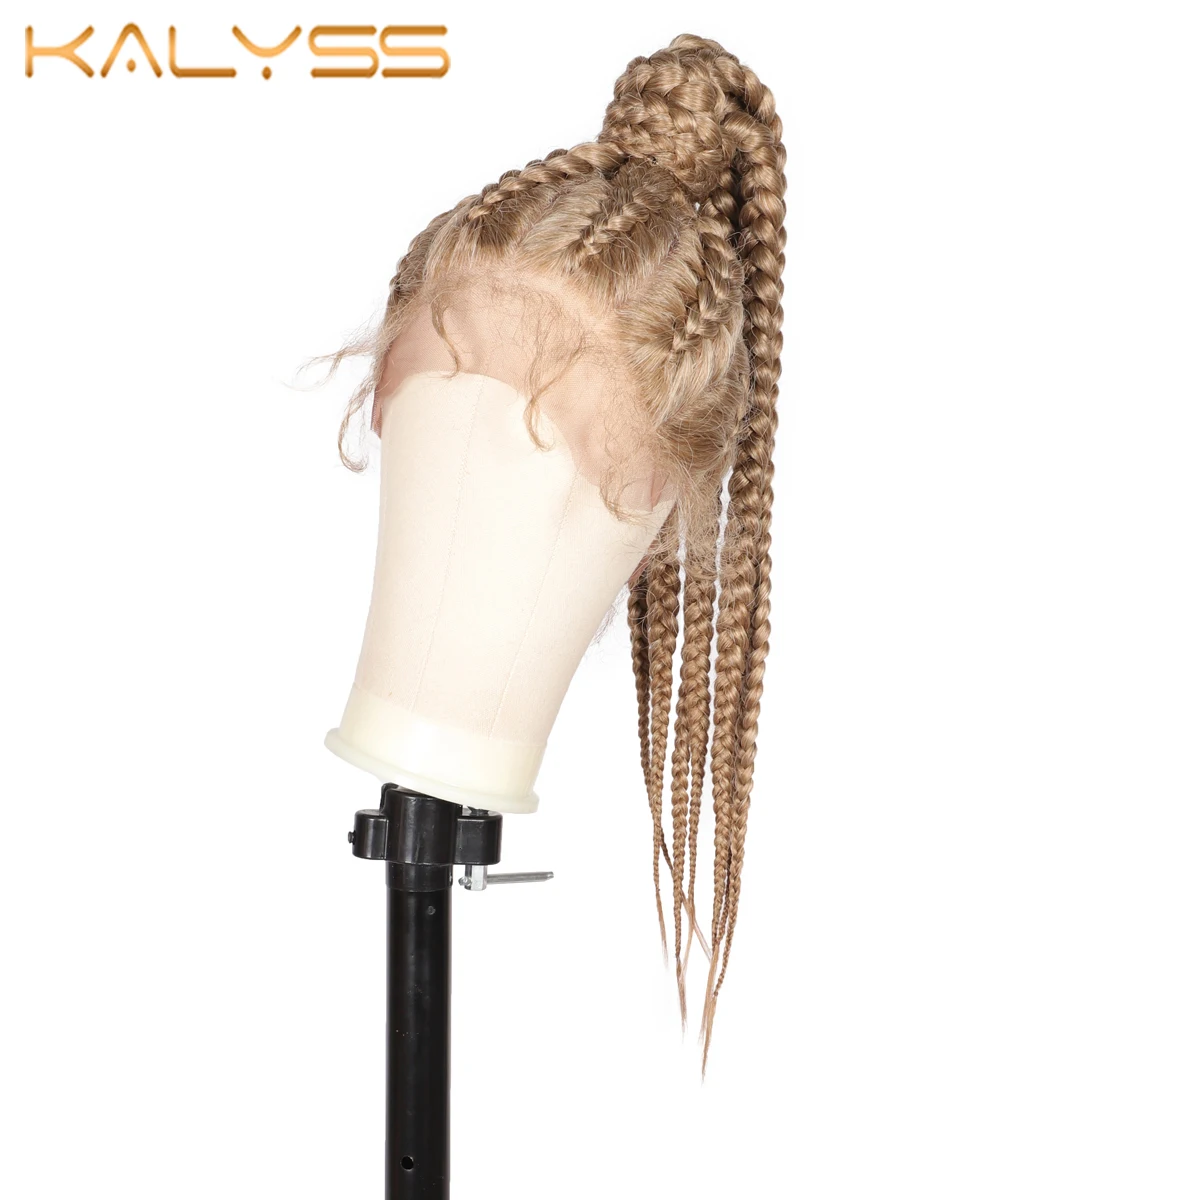 

Kalyss 22 Inches Braided Lace Front Wigs with Baby Hairs Bloned Cornrow Box Braids Ponytails Synthetic Wigs for Black Women